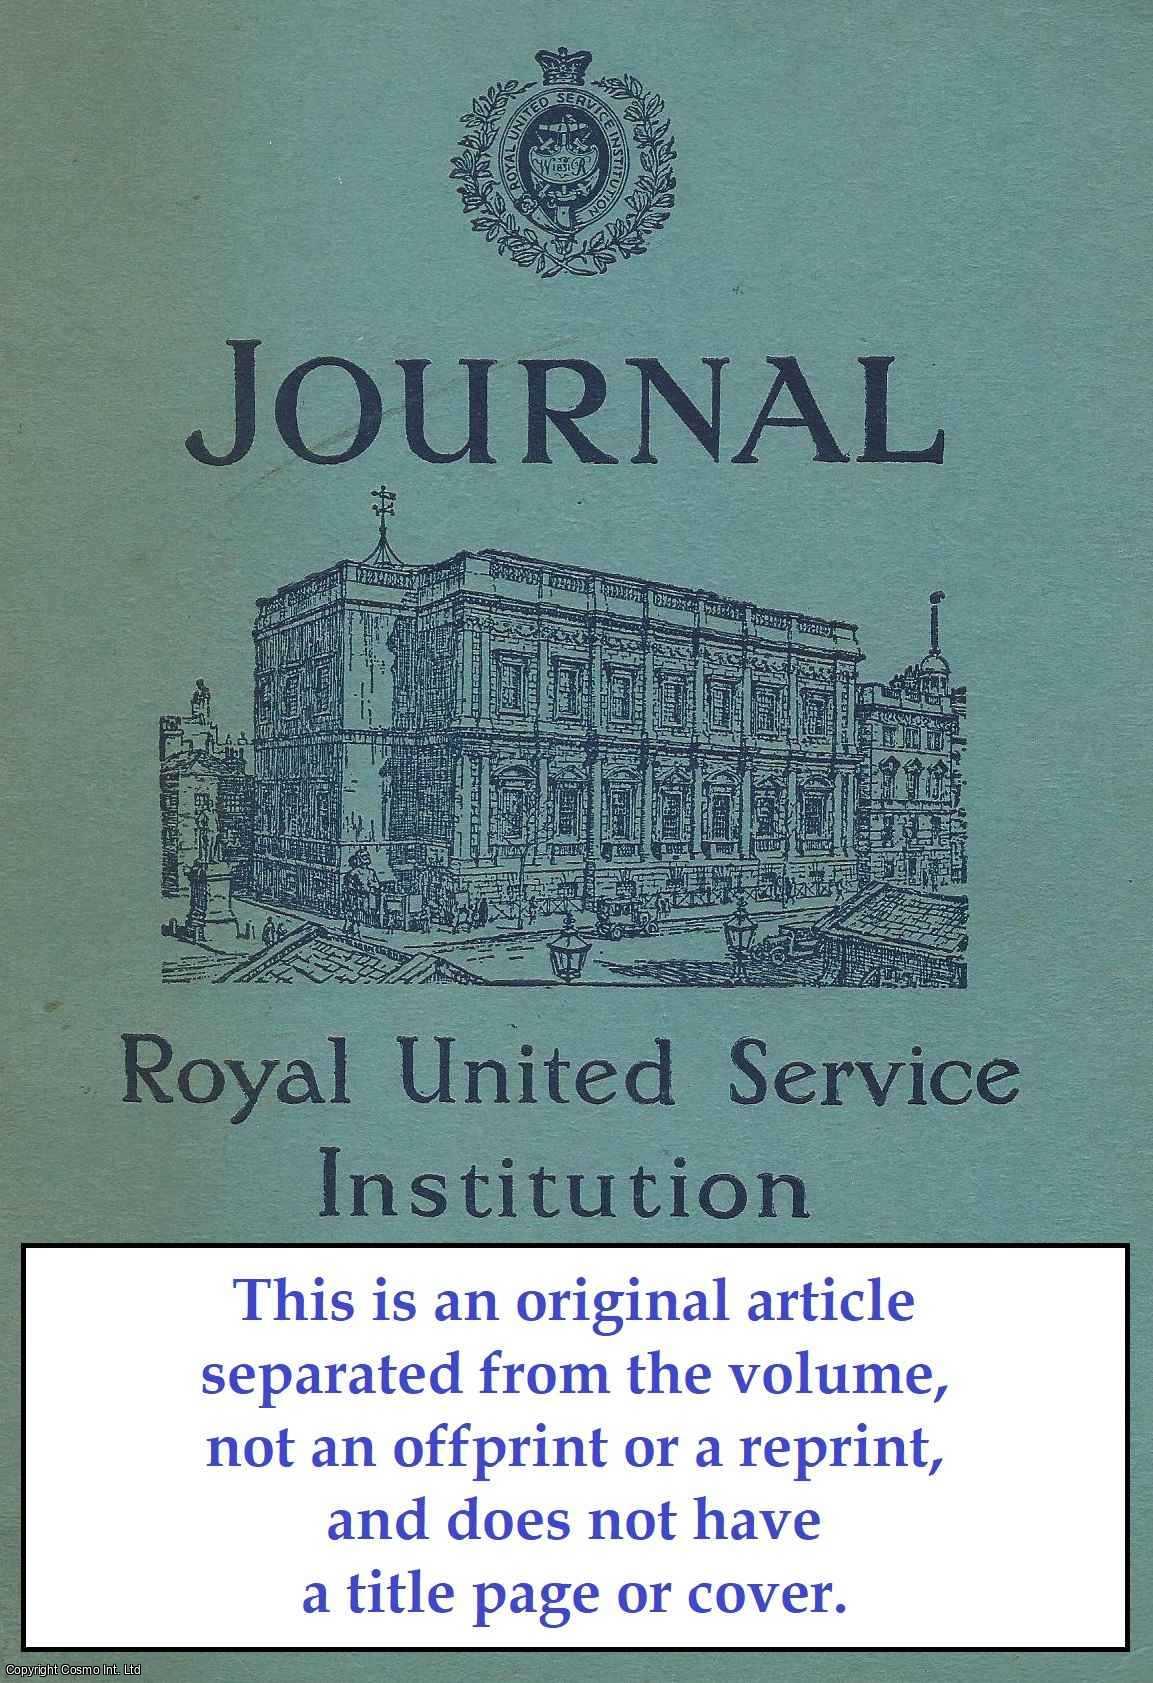 E. O'Balance - The Siege of Jerusalem, A.D. 70. An original article from Journal of The Royal United Service Institution, 1956.